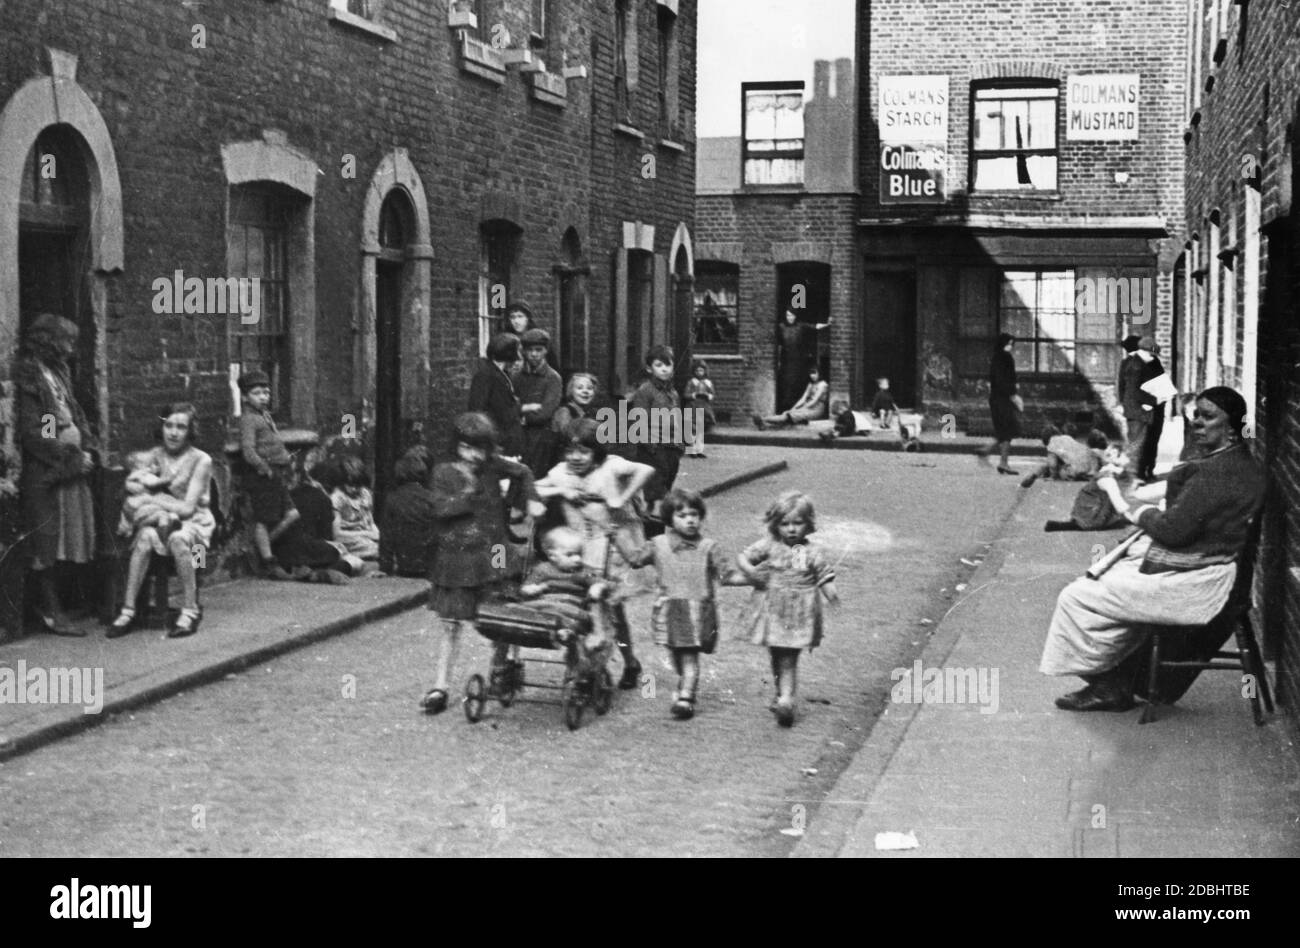 Children on a street in a poorer part of London during the Great Depression in the 1930s. Stock Photo